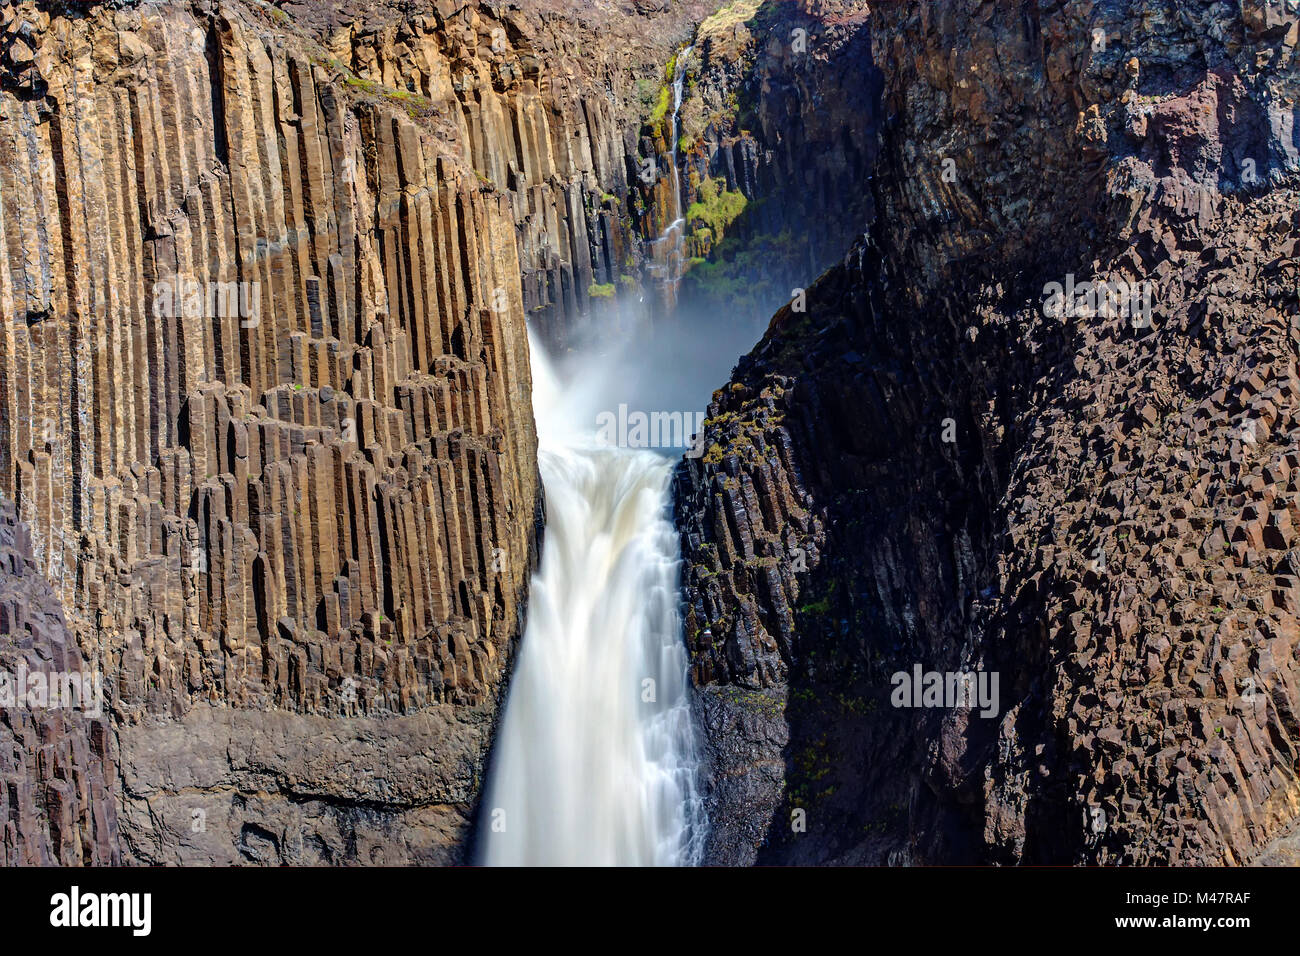 The Litlanesfoss waterfall in Iceland with its basaltic columns Stock Photo